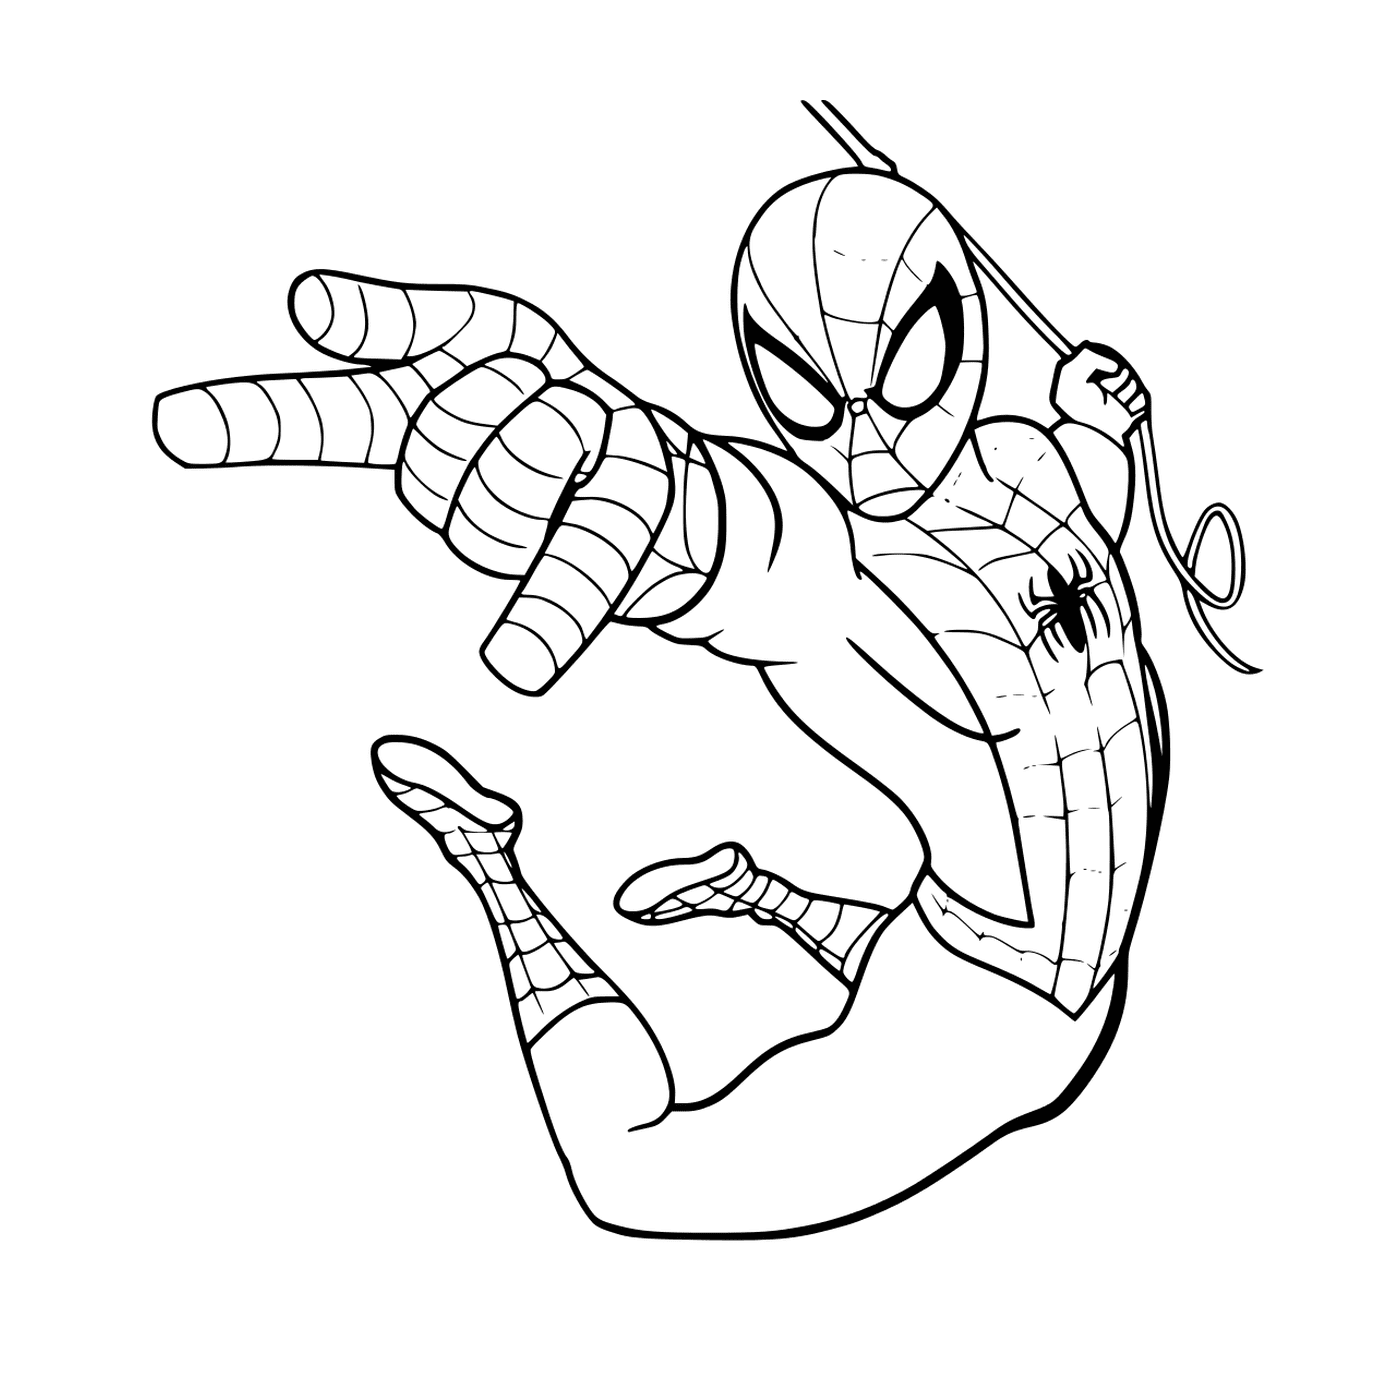  Spider-Man holding shears 